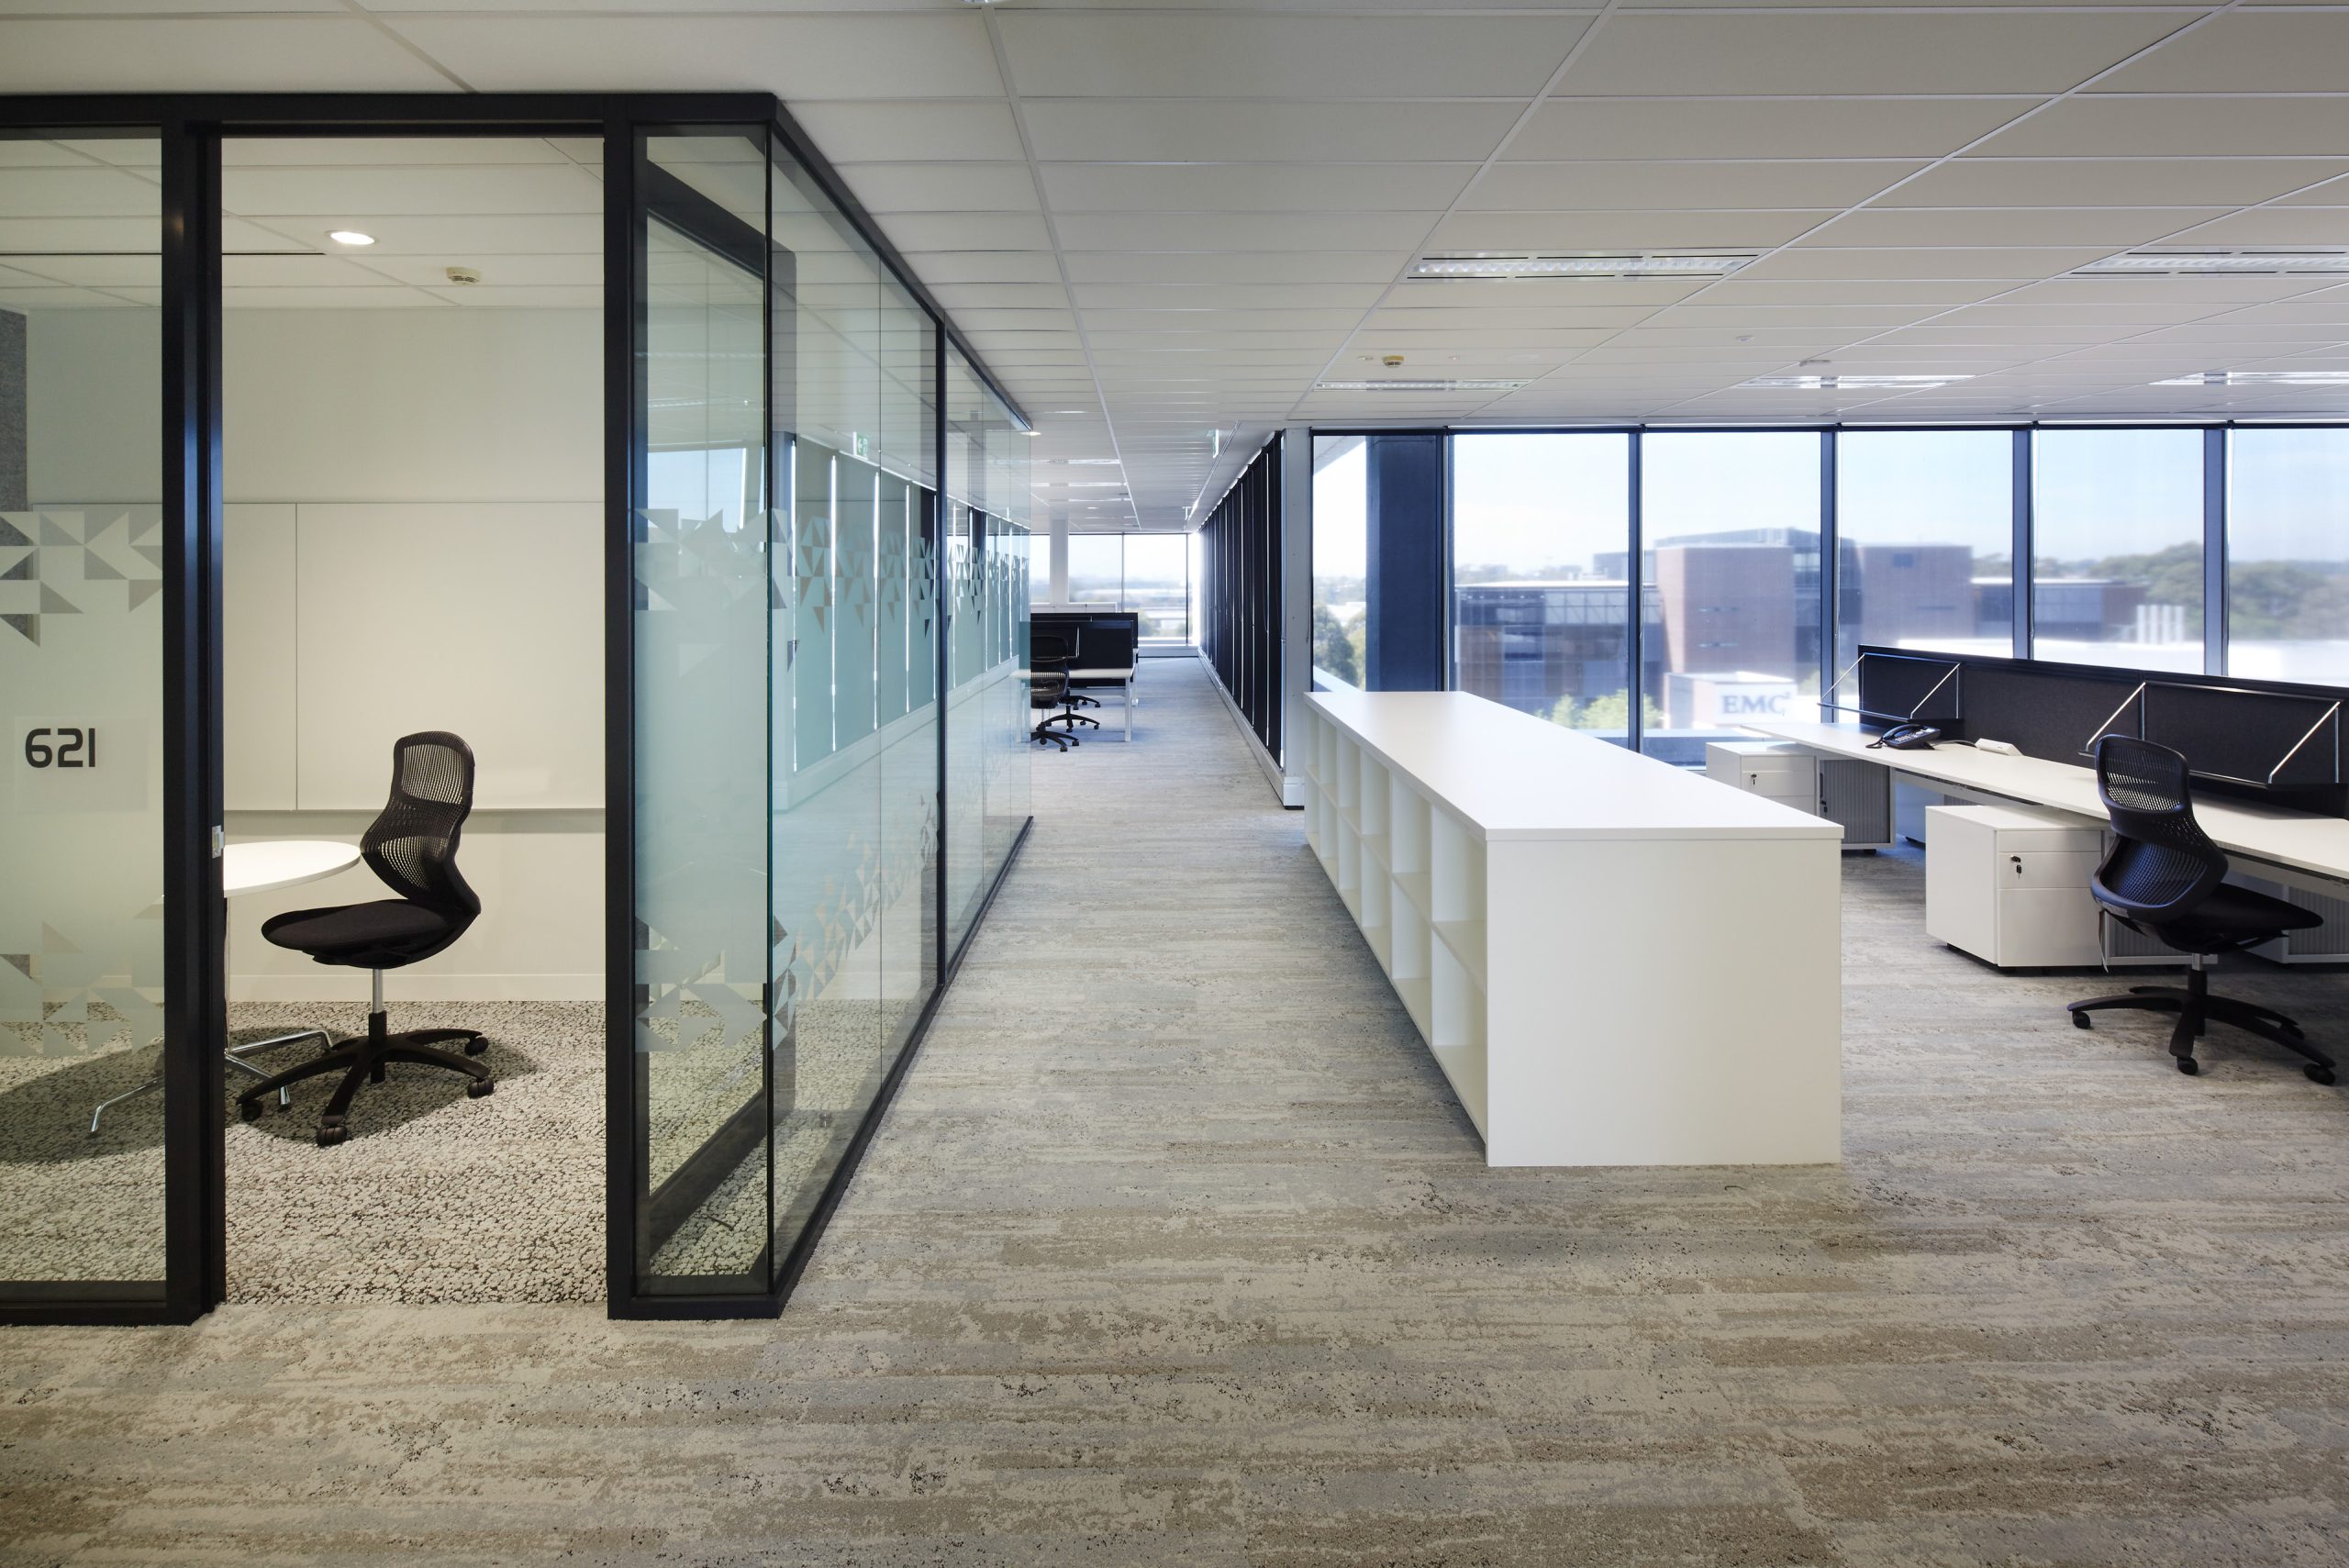 3 office space australian institute of health innovation taylor construction education fitout